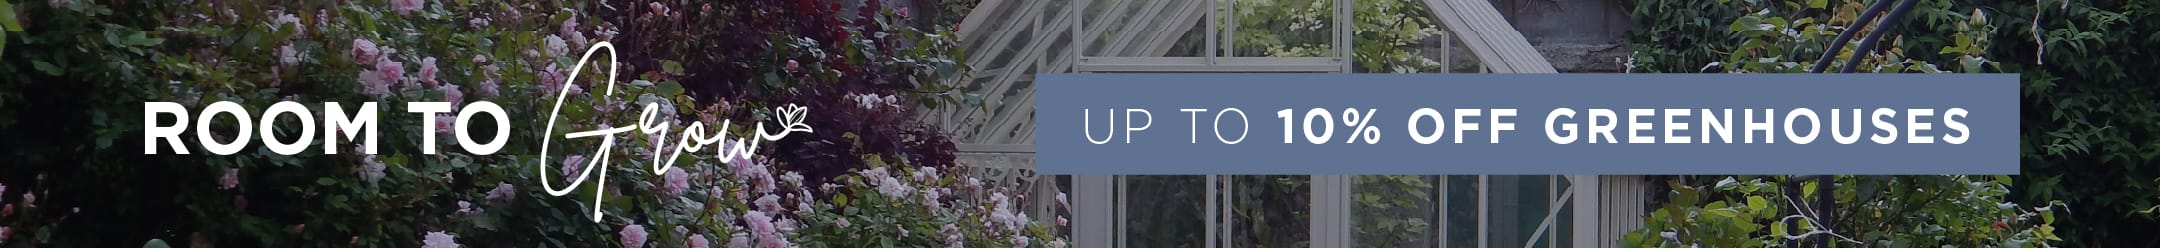 Up to 10% off Greenhouses